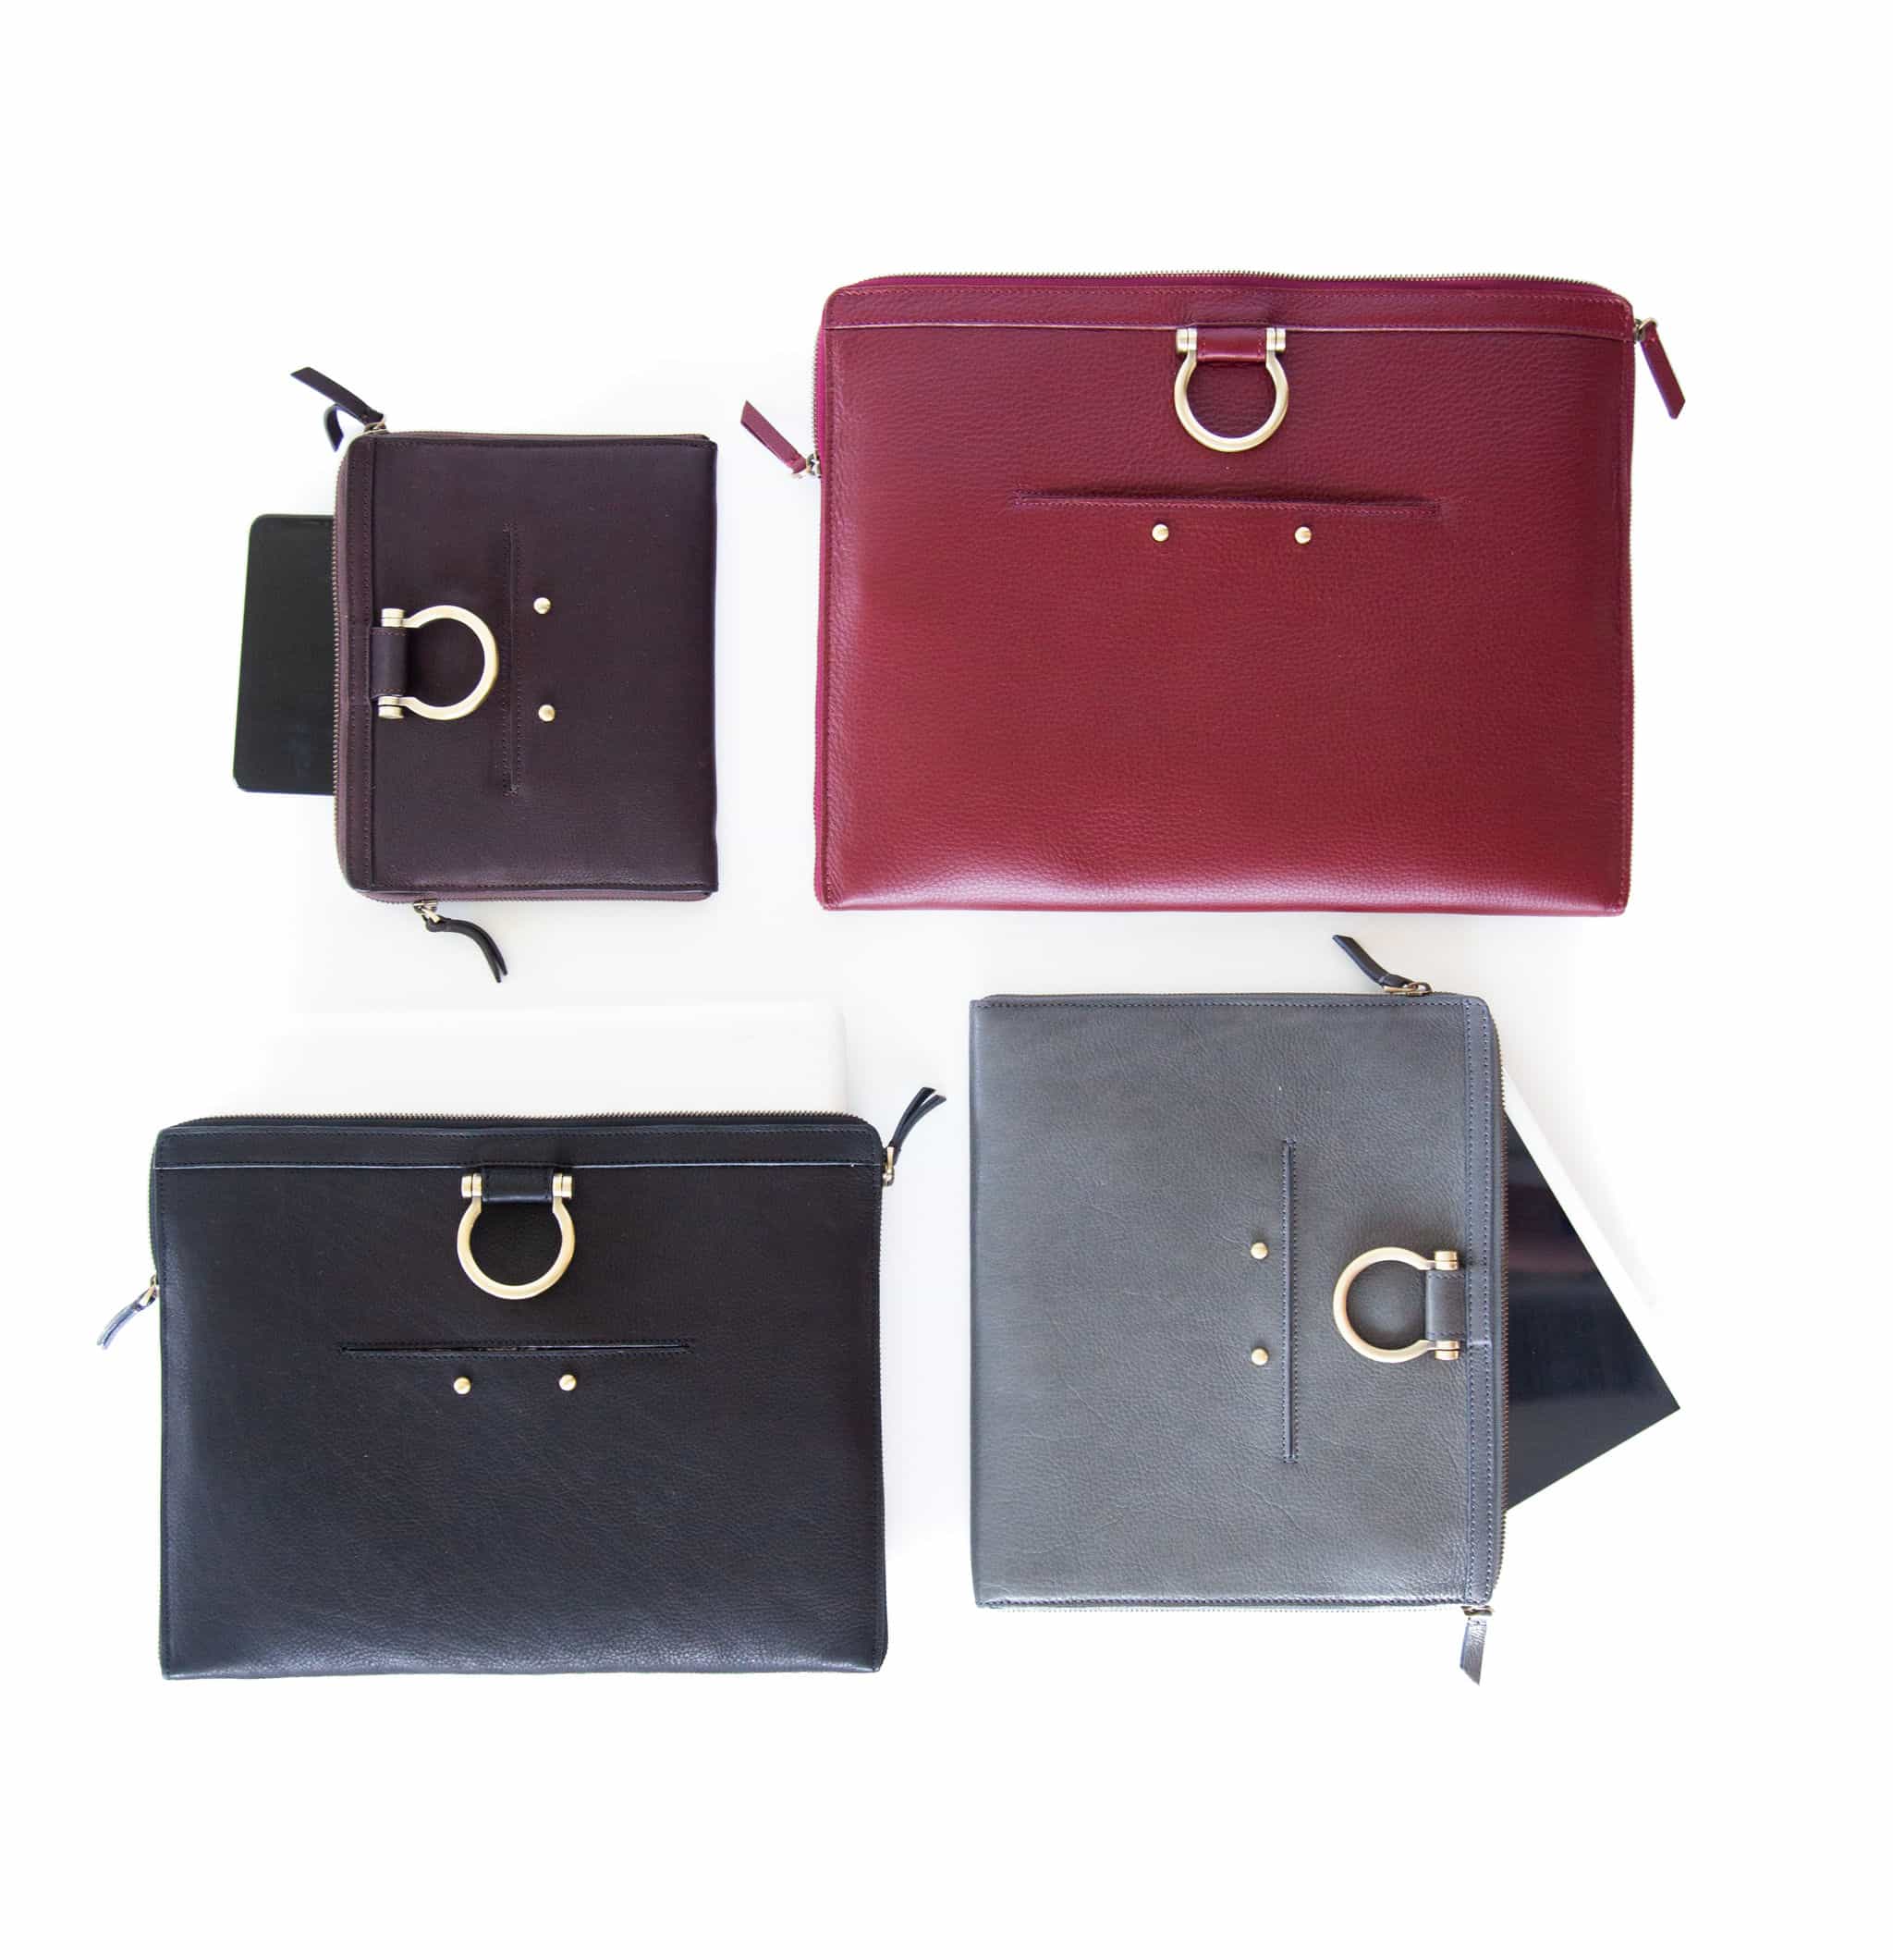 The M leather crossbody bags come in a variety of sizes because it’s a brand favorite year after year.